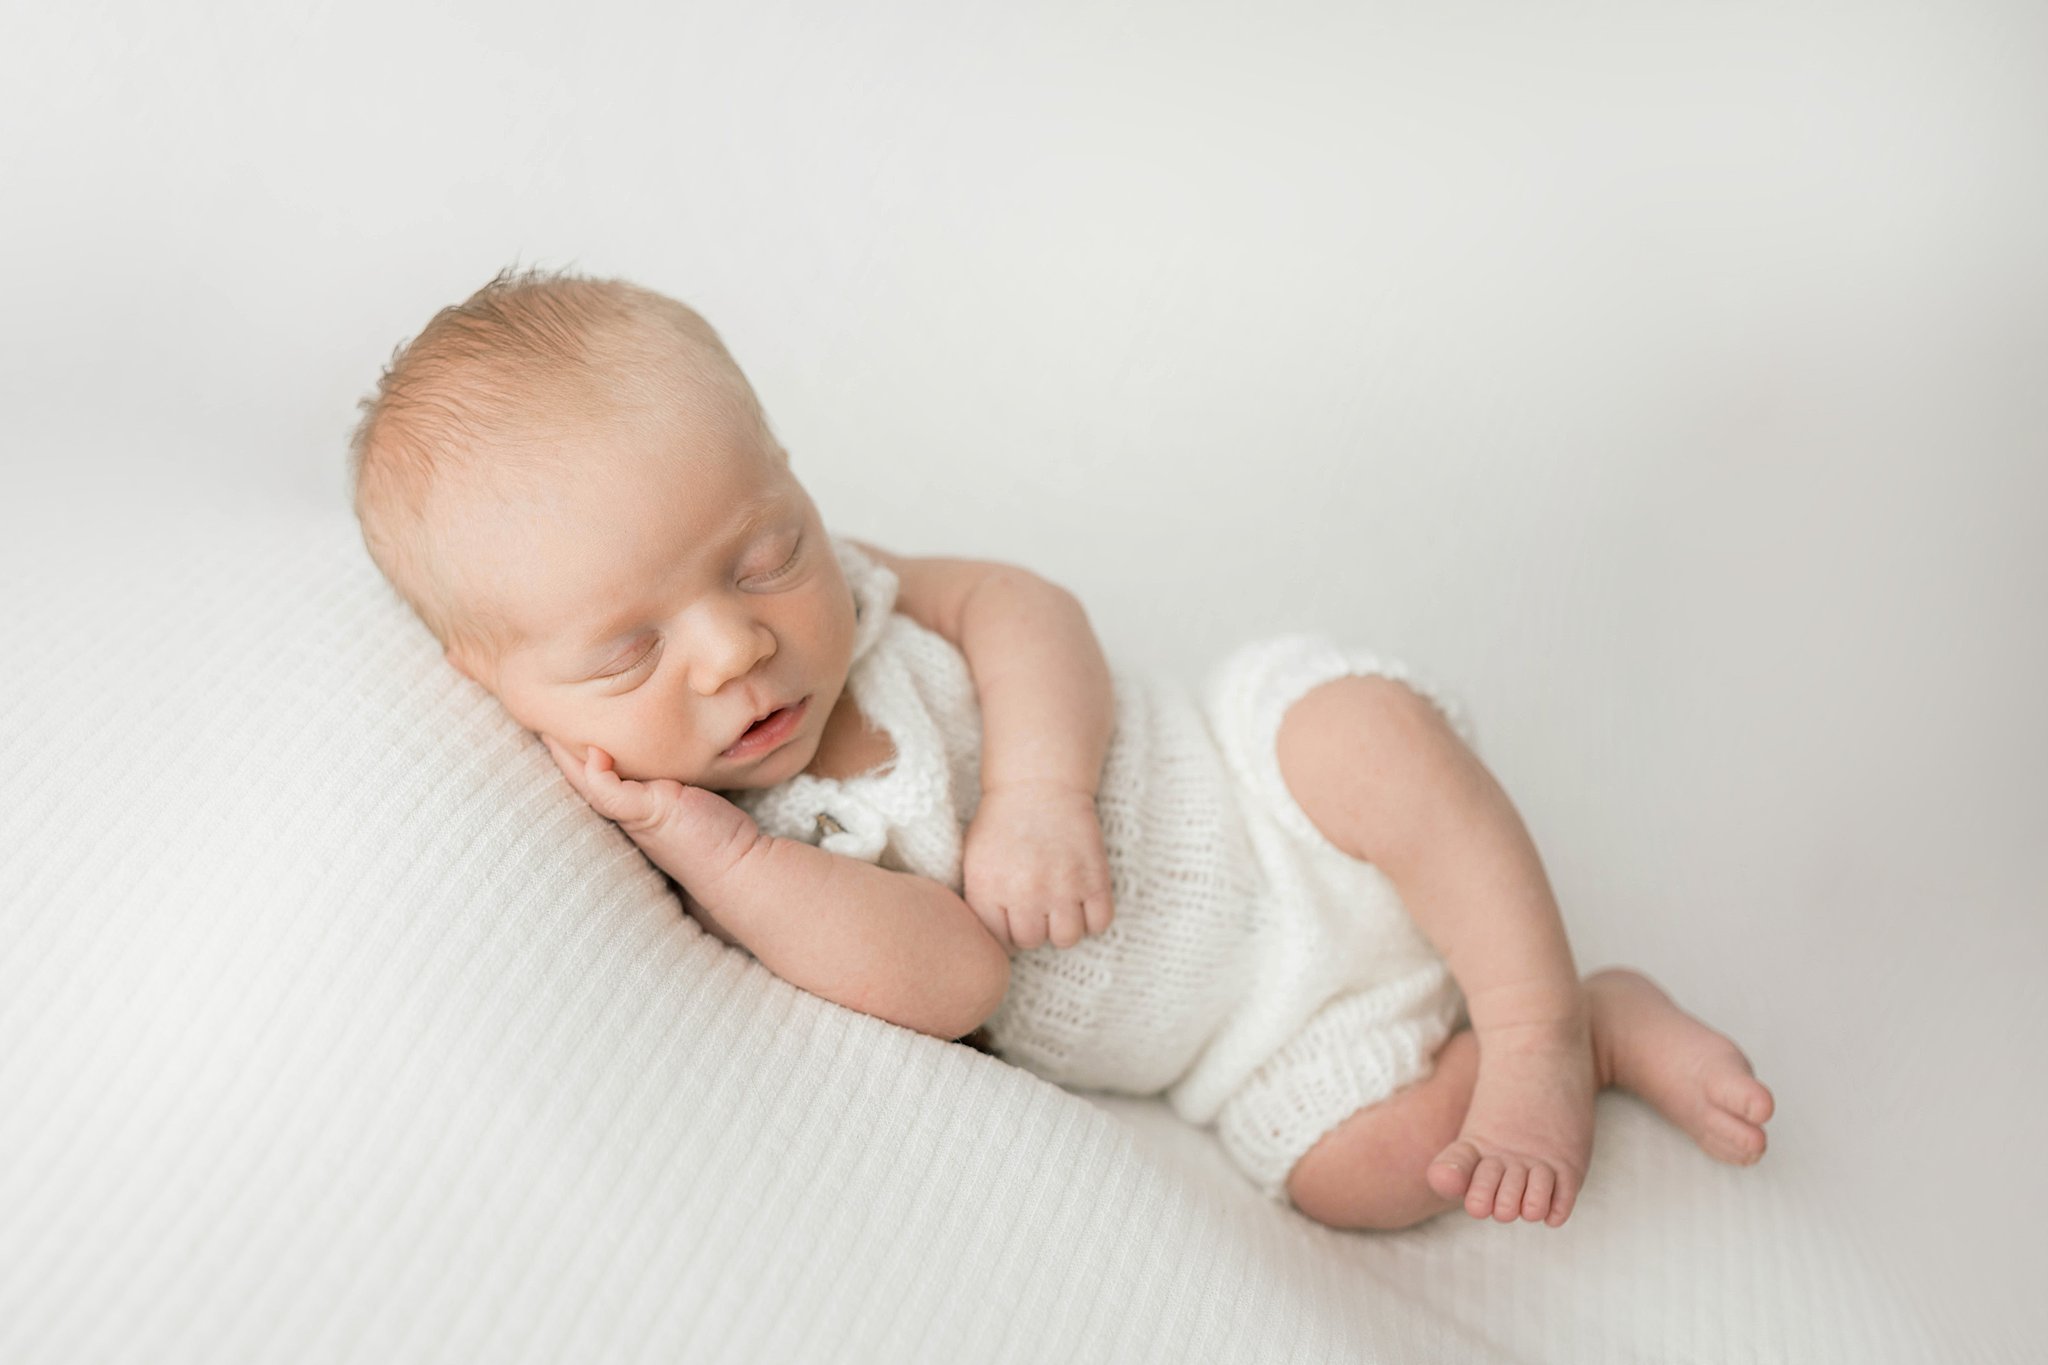 A newborn baby lounges and sleeps in a white knit onesie